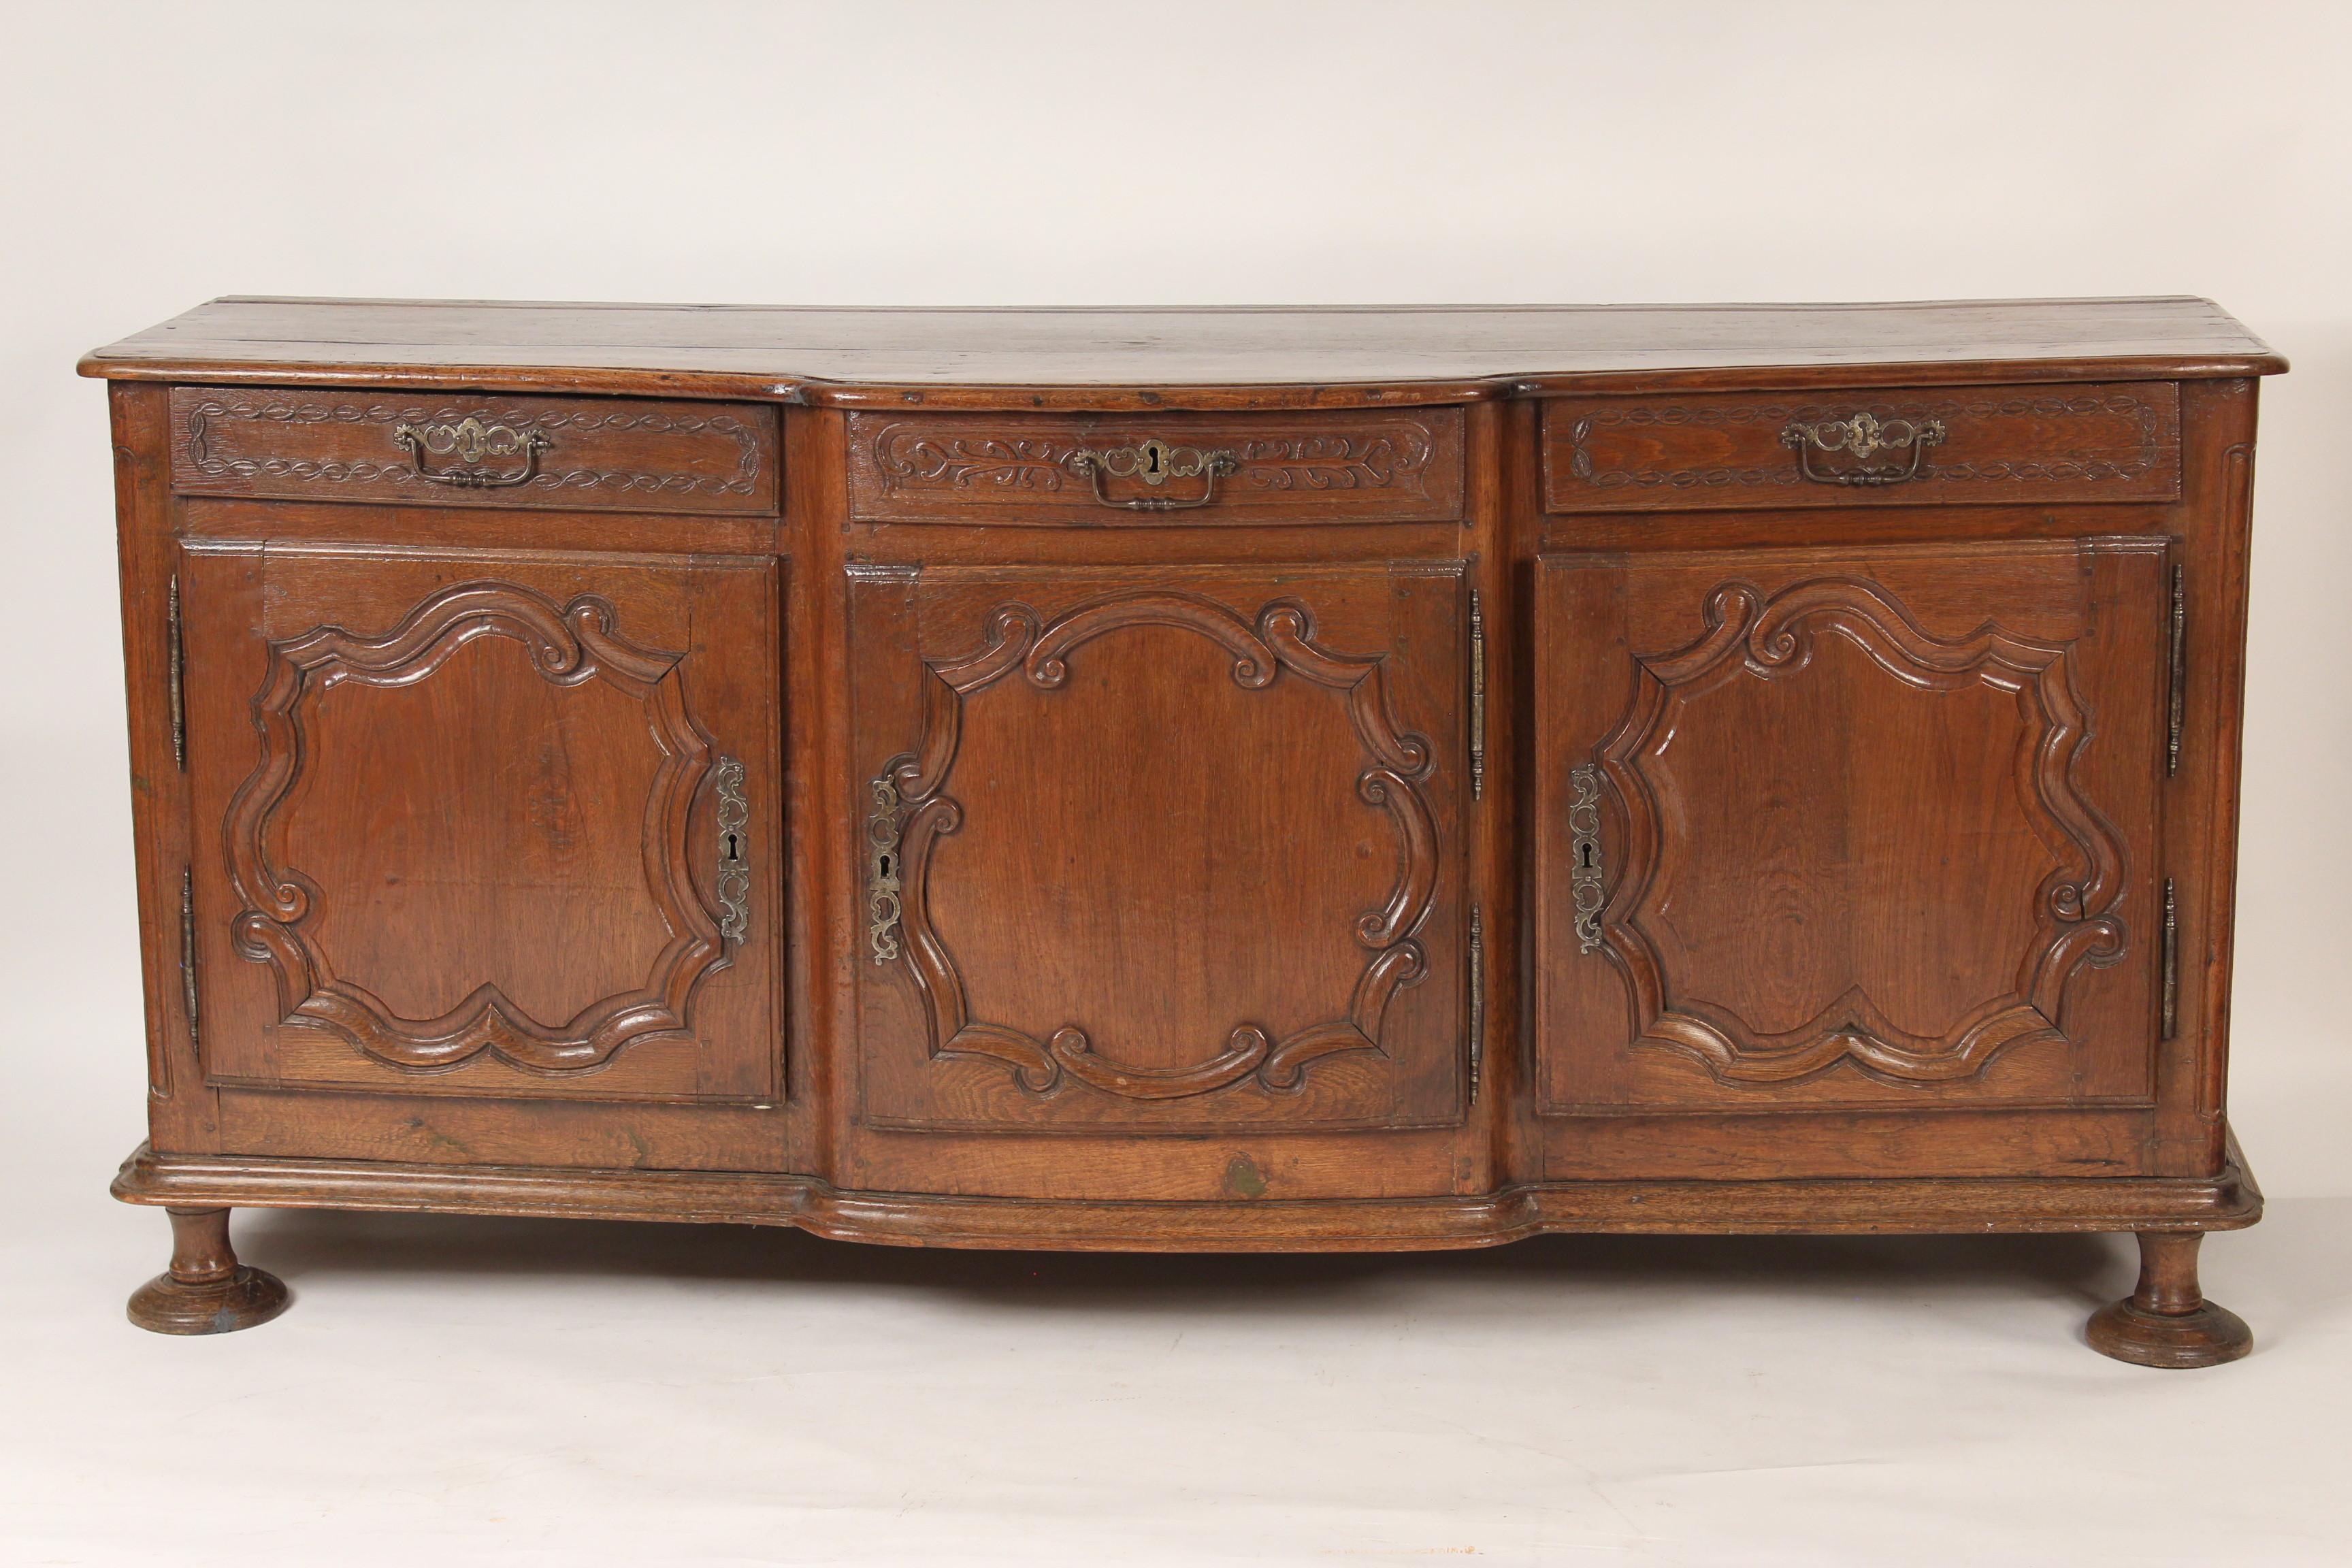 Louis XV provincial carved oak enfilade, 18th century. The wood has a nice old patina.